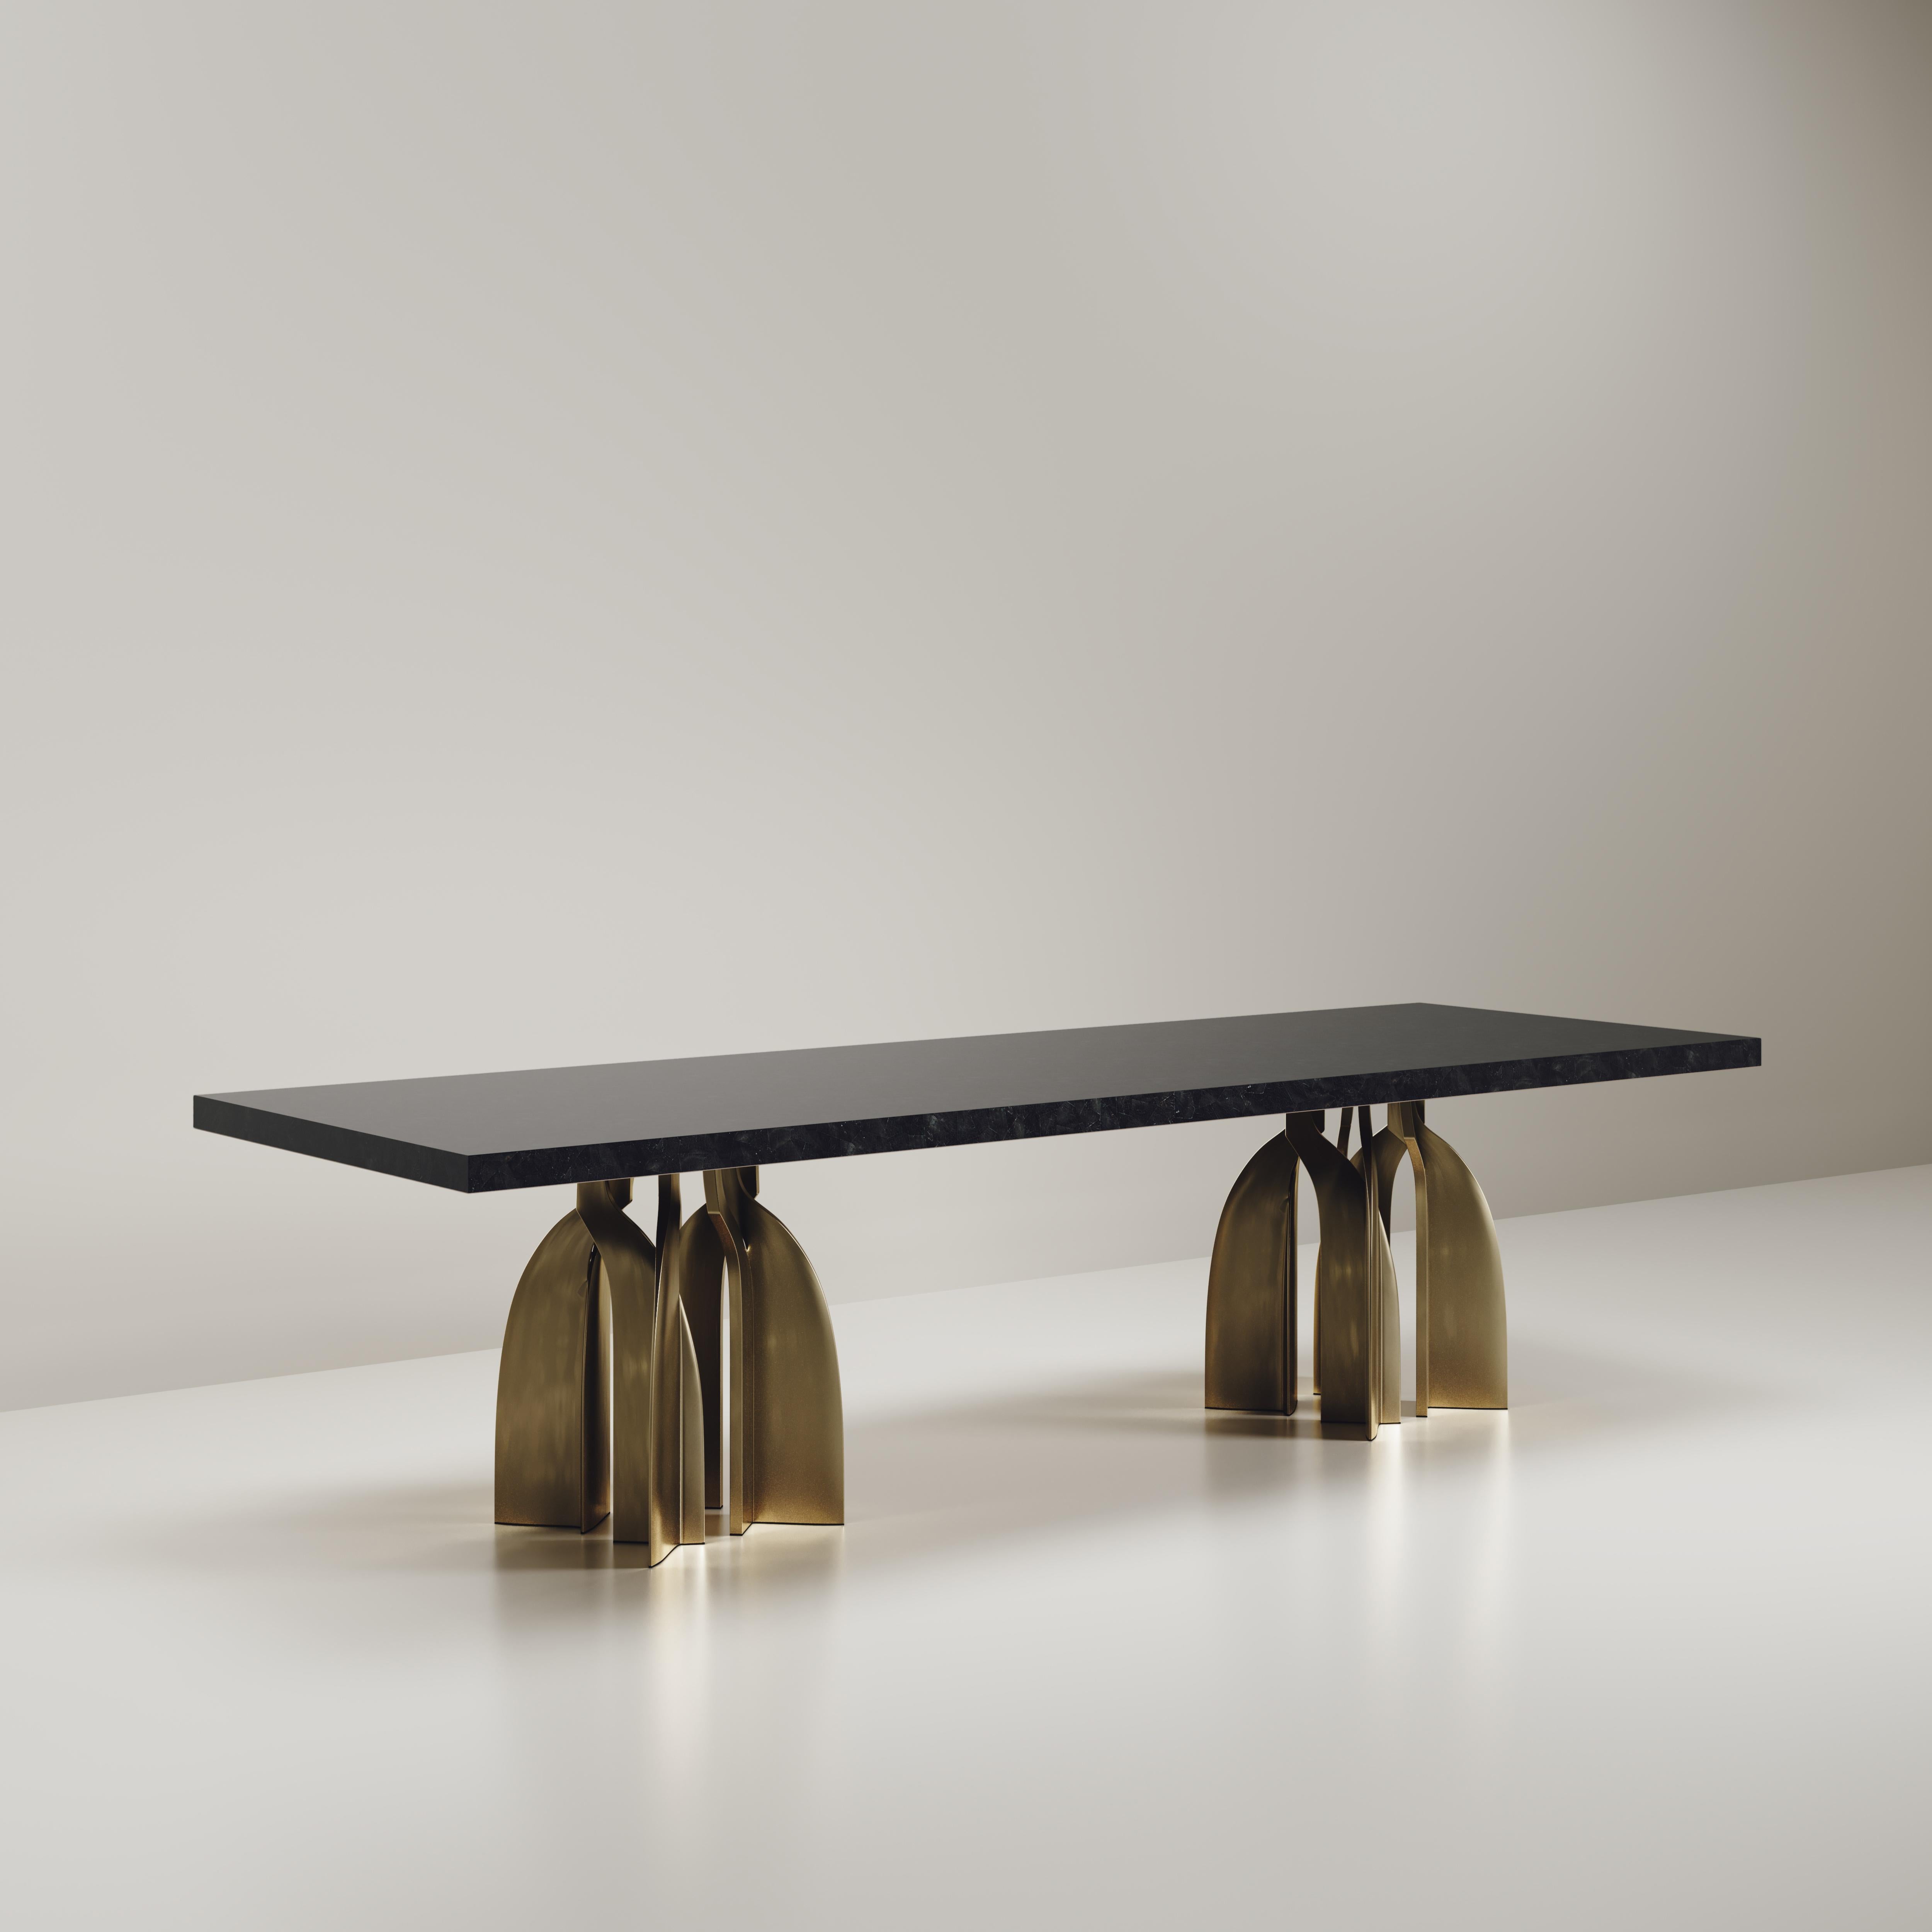 The Chital Dining table is a stunning piece, a statement in any space. The black pen shell inlaid top is sleek and dramatic, and followed by bronze-patina brass sculptural legs clustered together as the base. This piece is designed by Kifu Augousti,